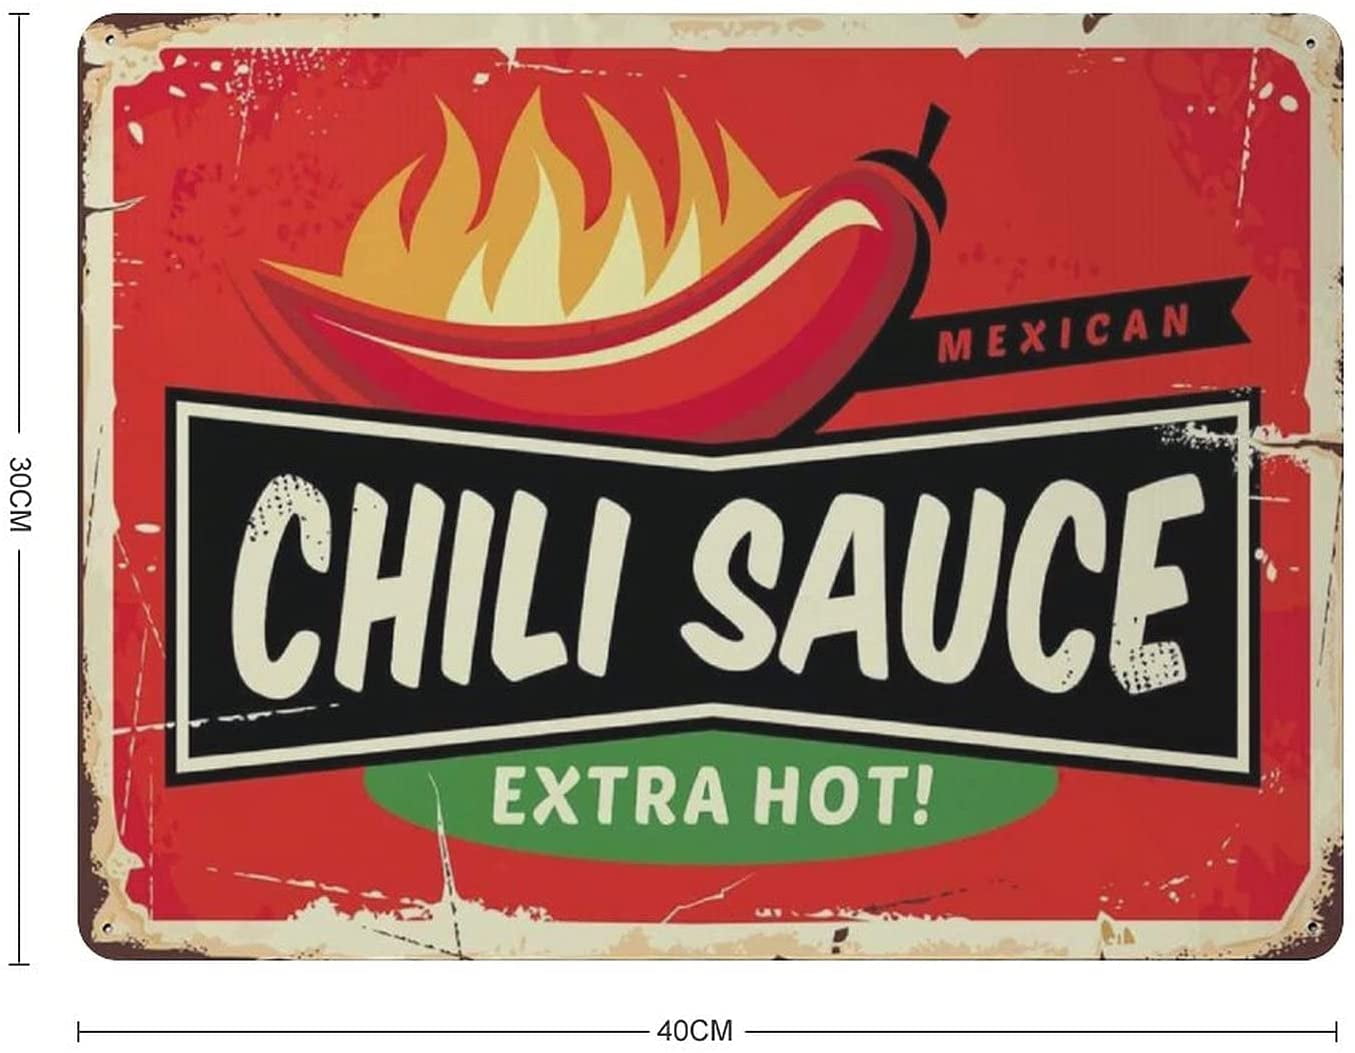 Chili Sauce Vintage Sign With Chili Pepper On Fire Hot Poster 18x12 inch 